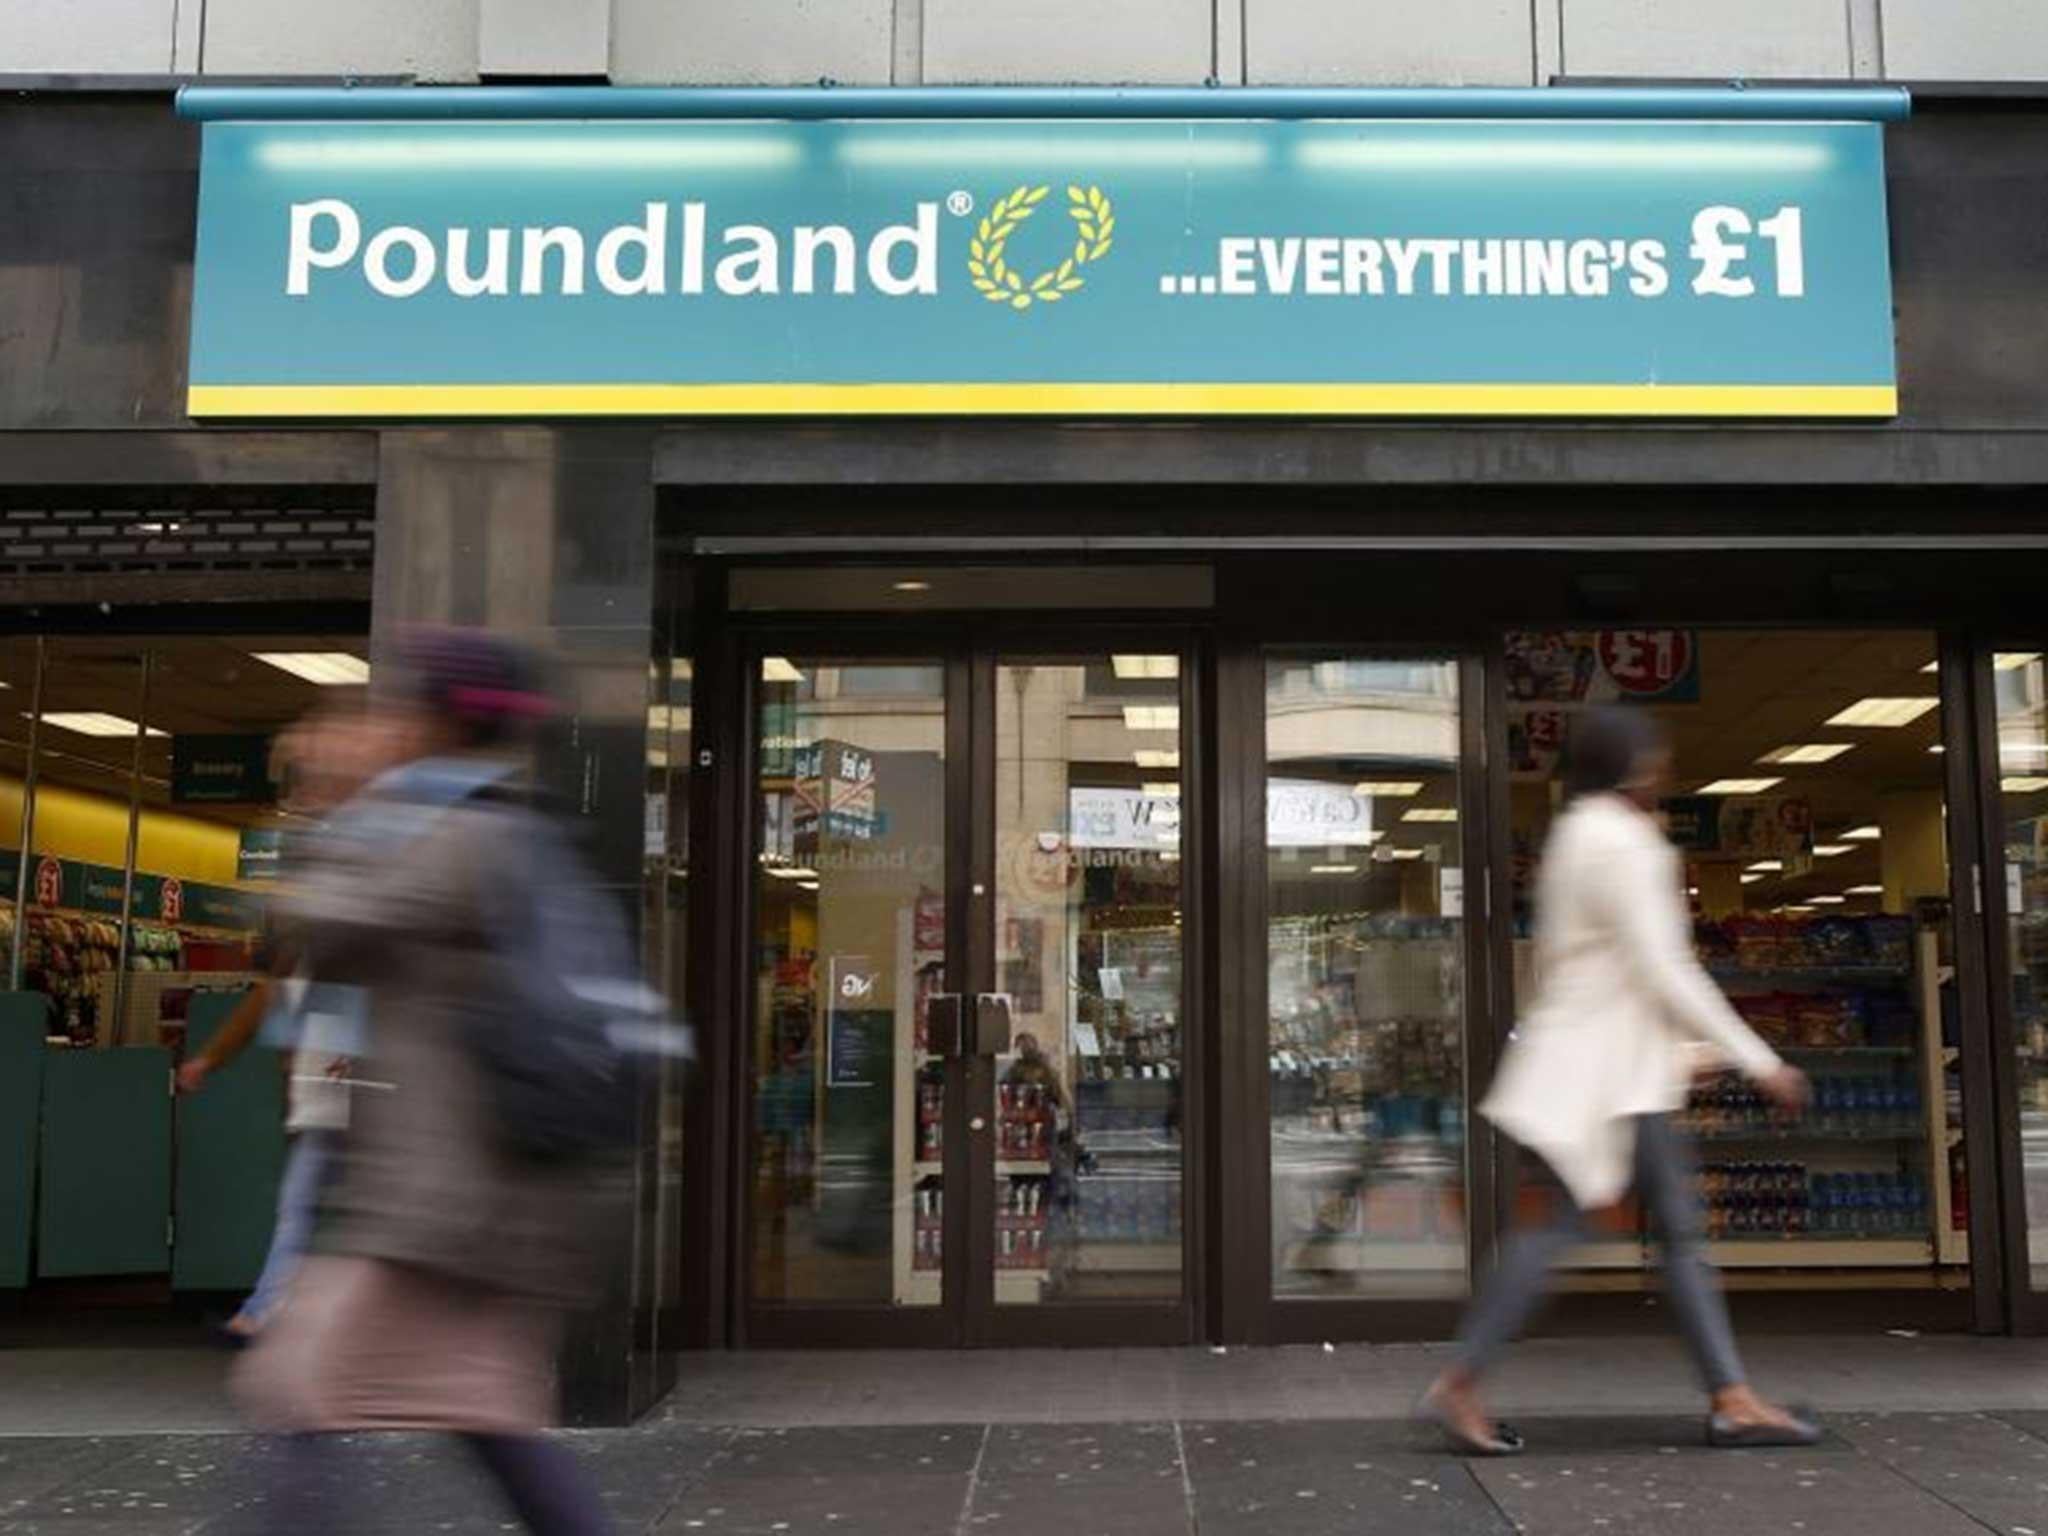 Andrew Devine caused damage to a Poundland shop and a Coral bookmakers next door during the incident